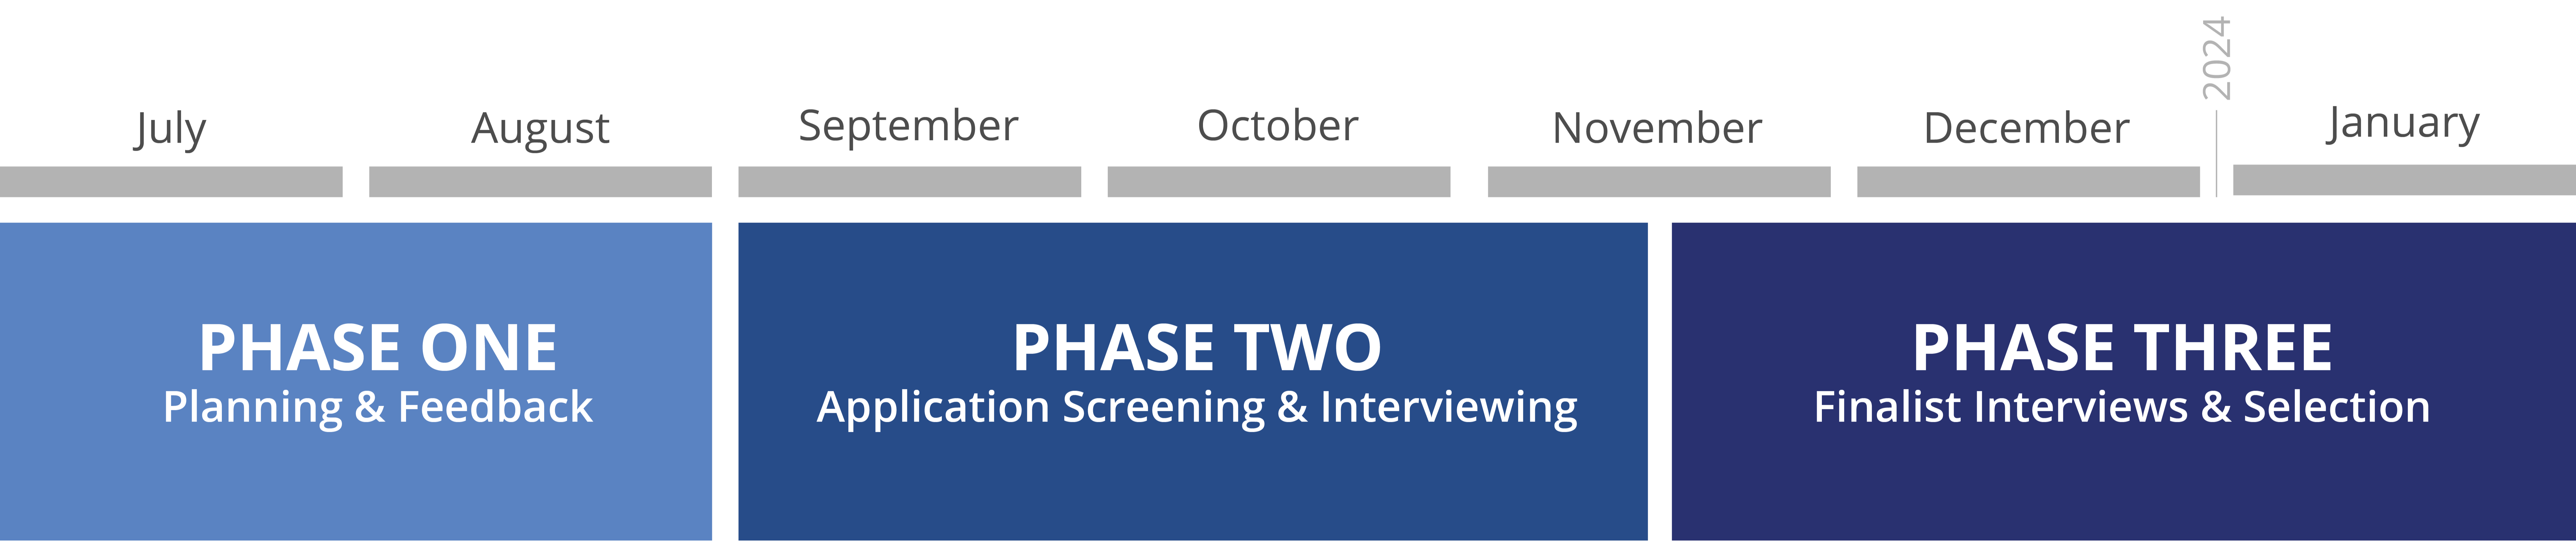 Review process timeline for sup